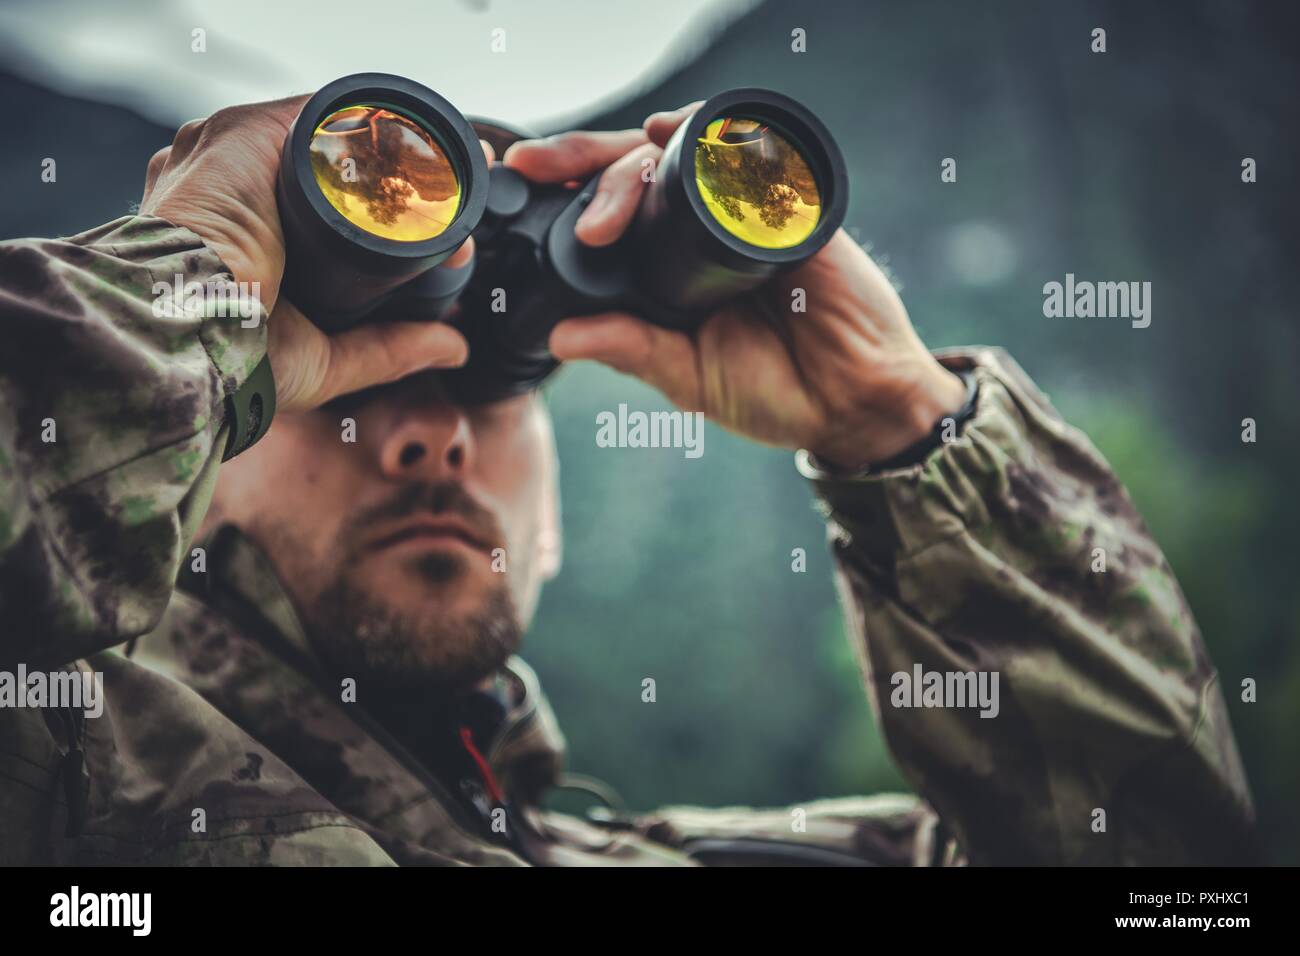 Caucasian Army Soldier in His 30s with Binoculars in Hands. Military Theme. Stock Photo